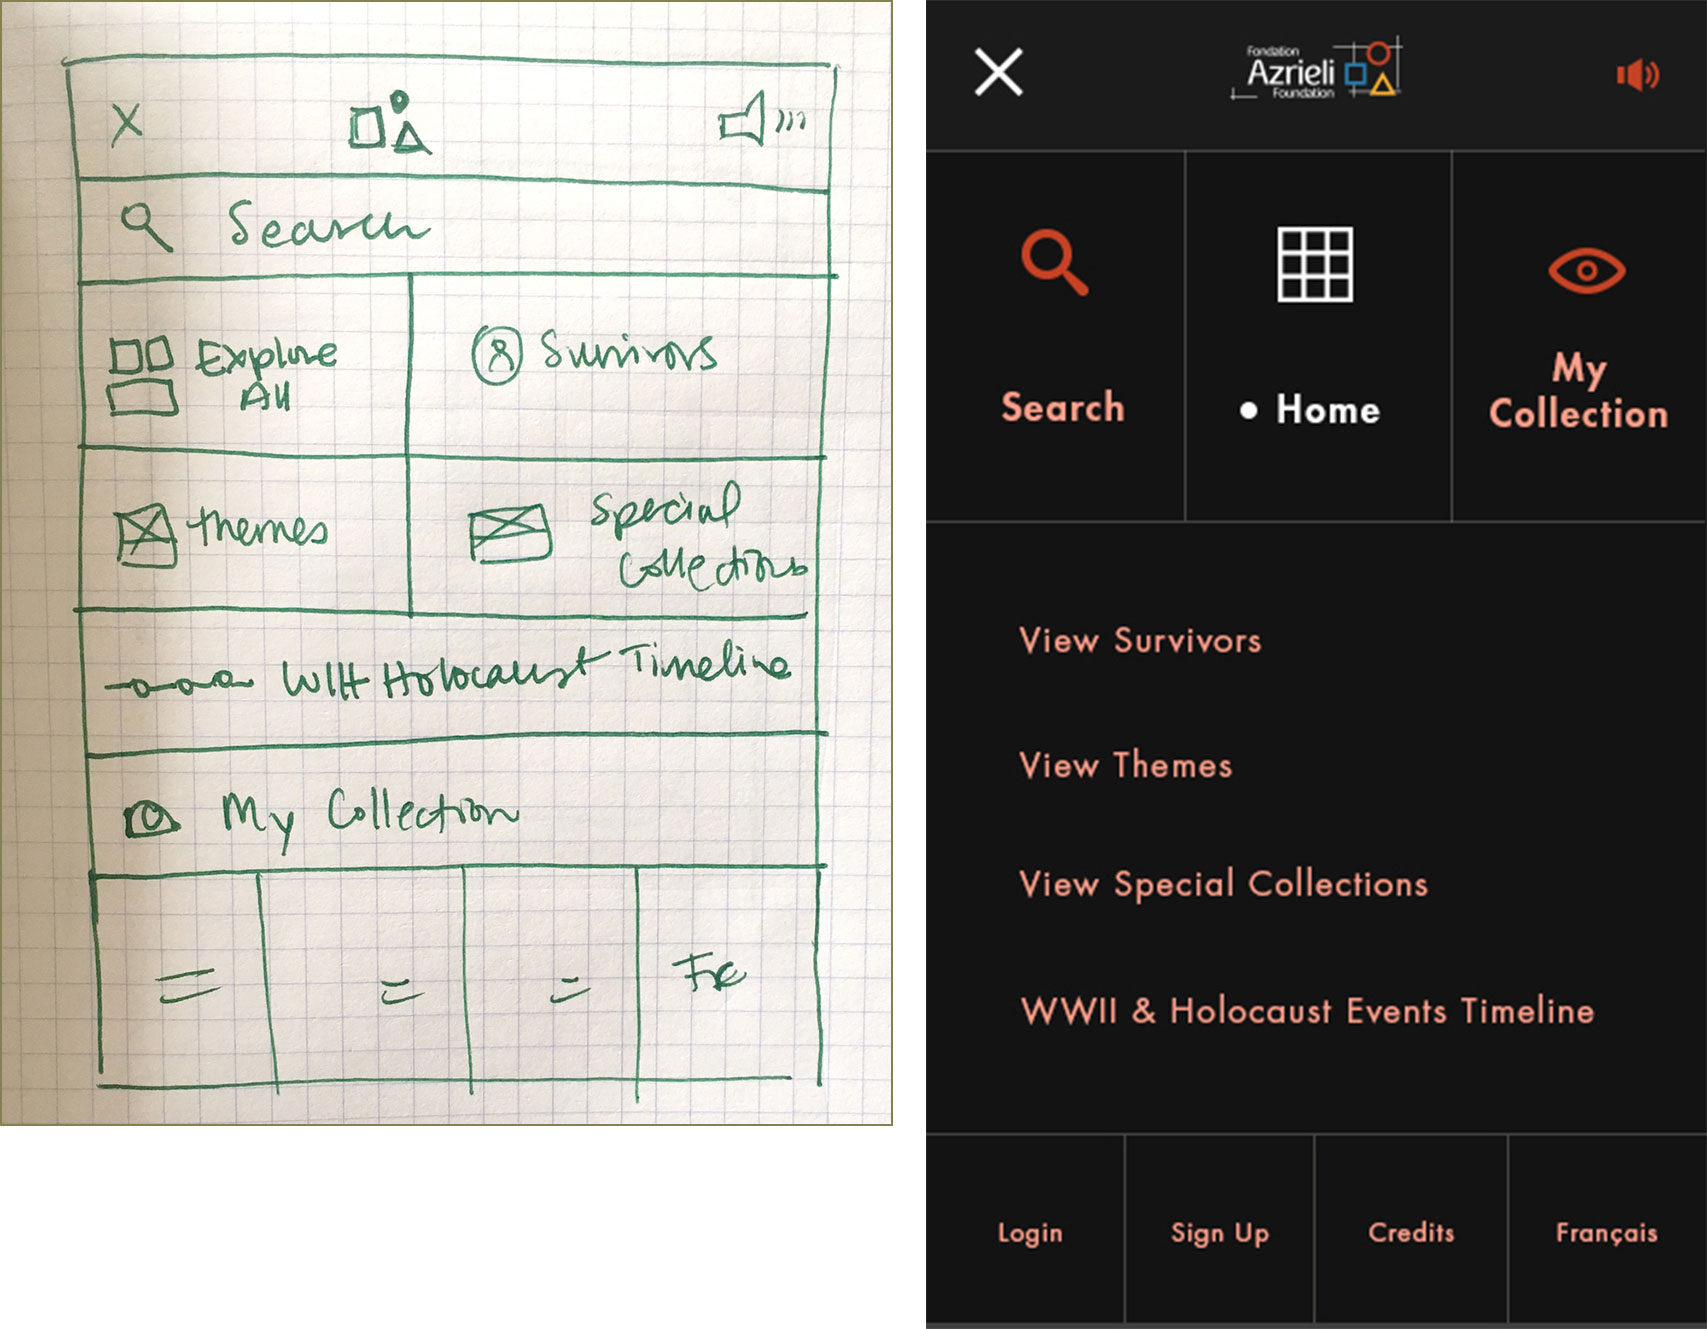 Low fidelity sketch and high fidelity Photoshop mockup of global navigation incorporating usability testing insights.